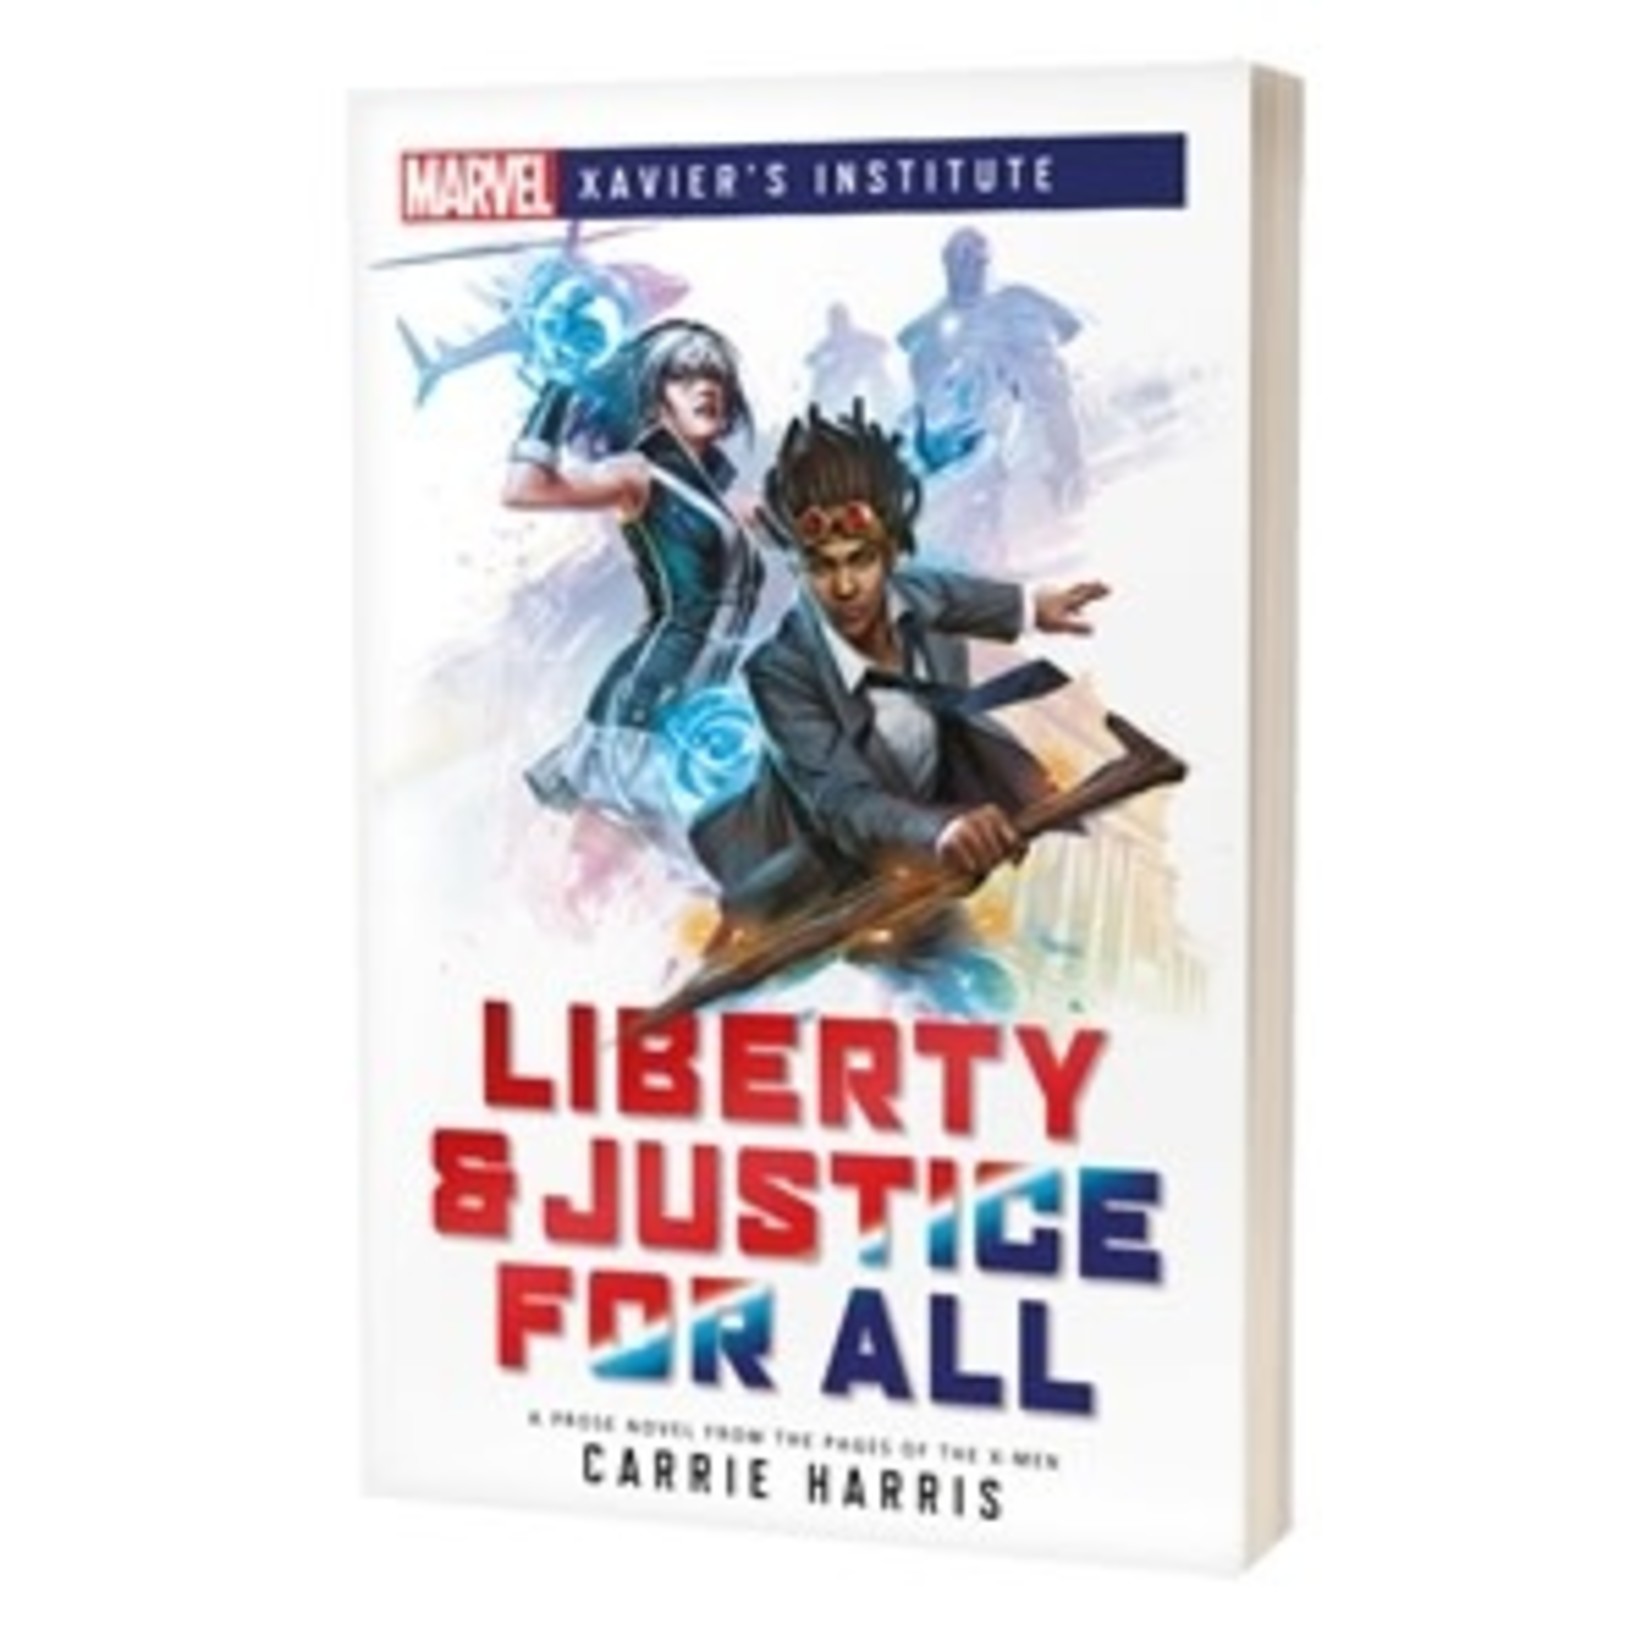 Marvel Xavier's Institute: Liberty & Justice for All (Novel)